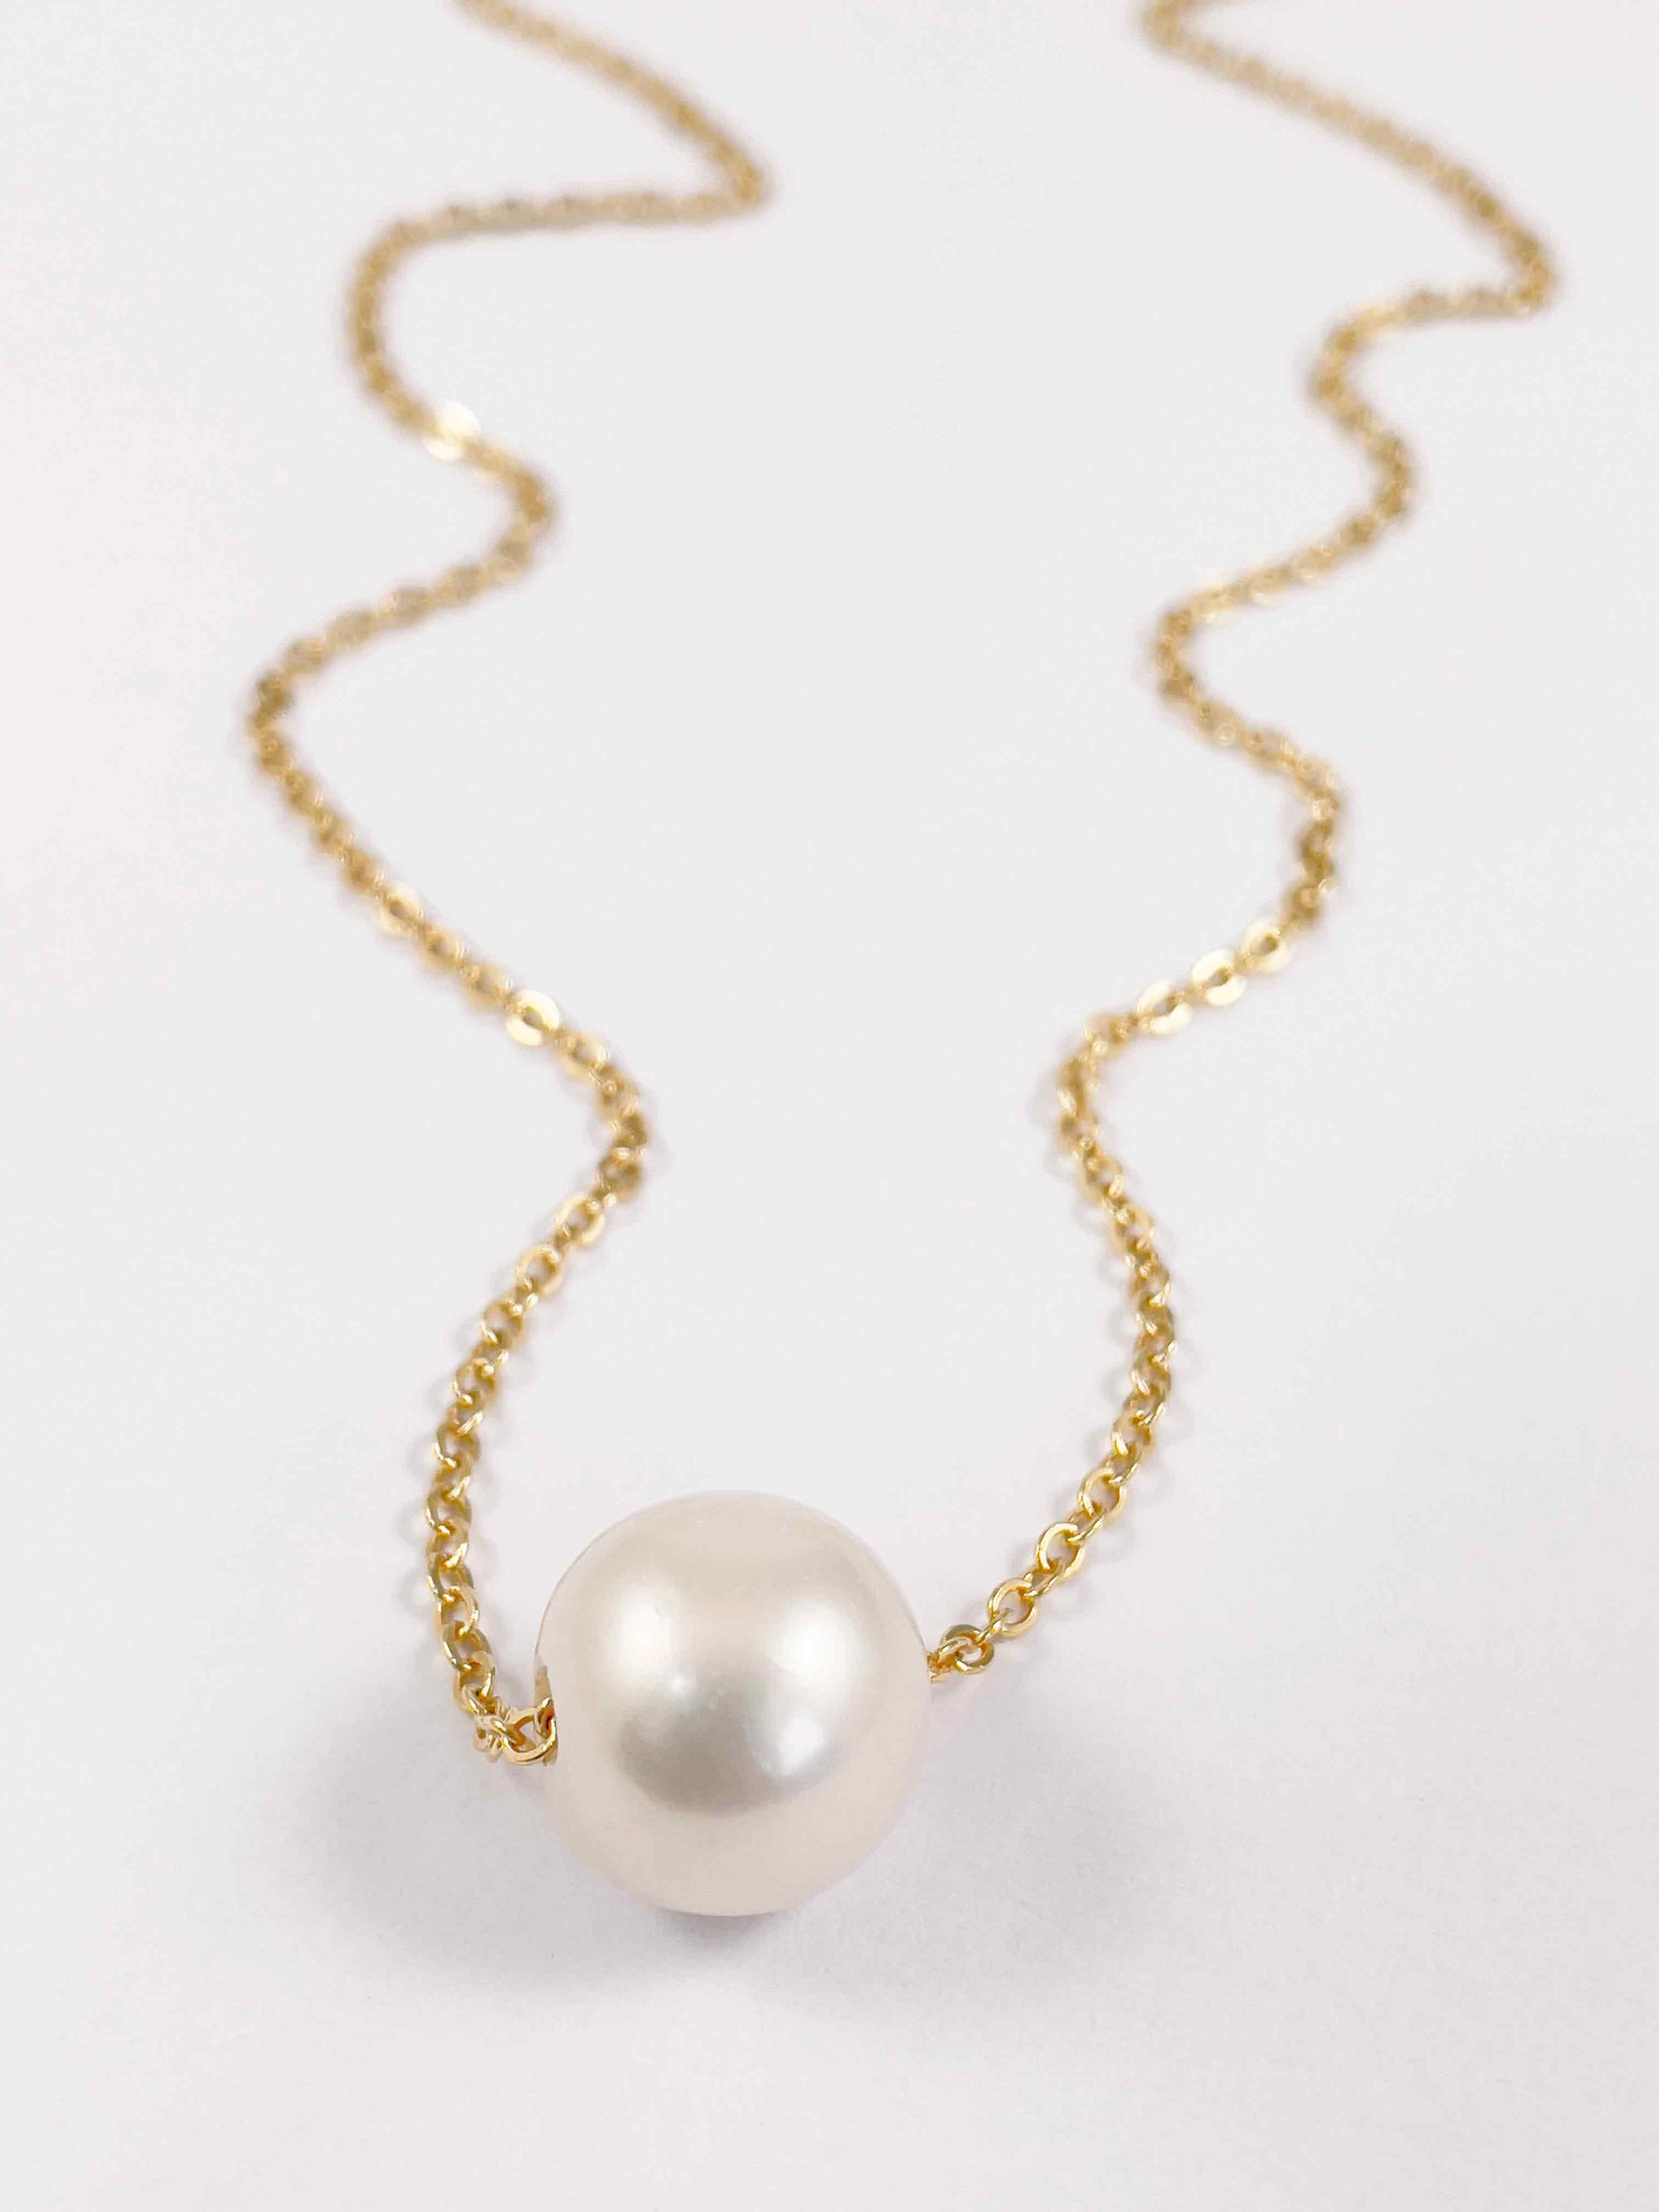 Floating pearl necklace in gold